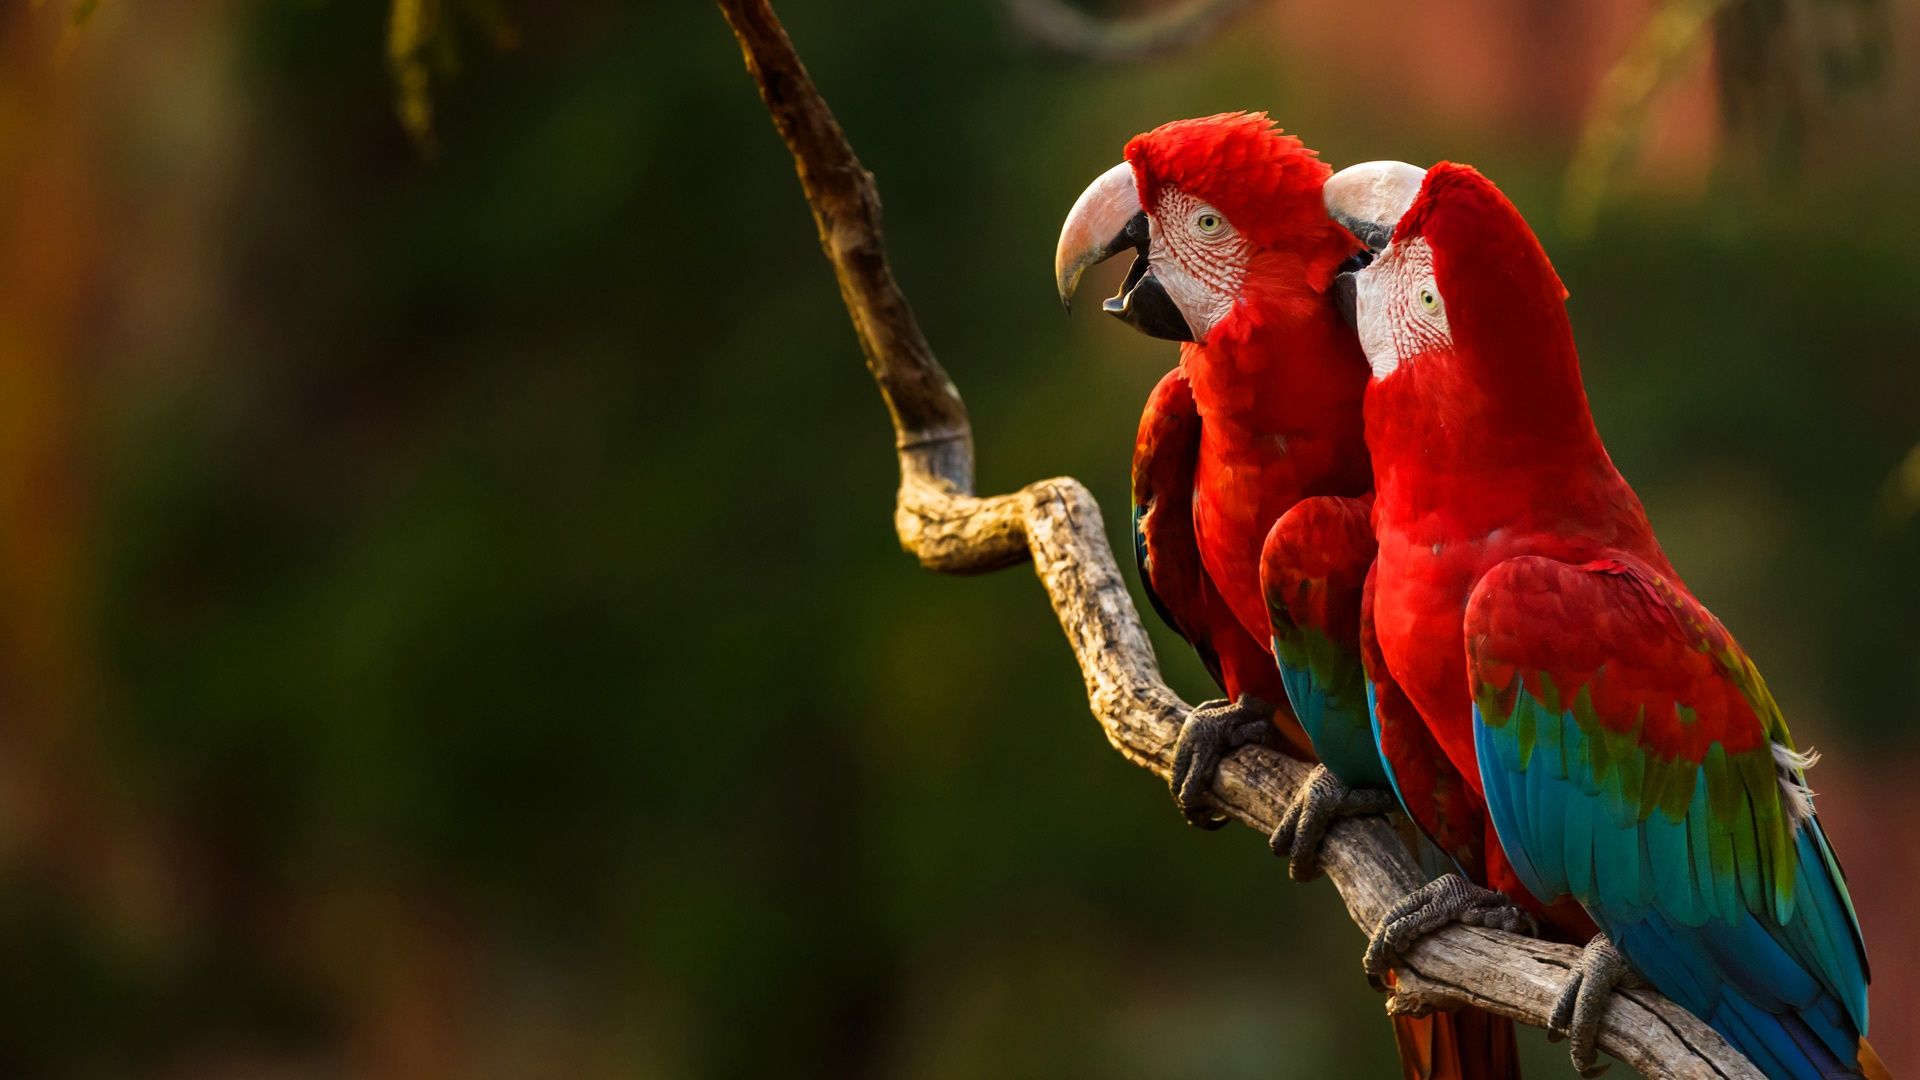 Colorful Macaw Parrots - Stunning Birds in 4K 🐦Sleep Relax Forest Ambient  Sounds 4K TV Screensaver - YouTube